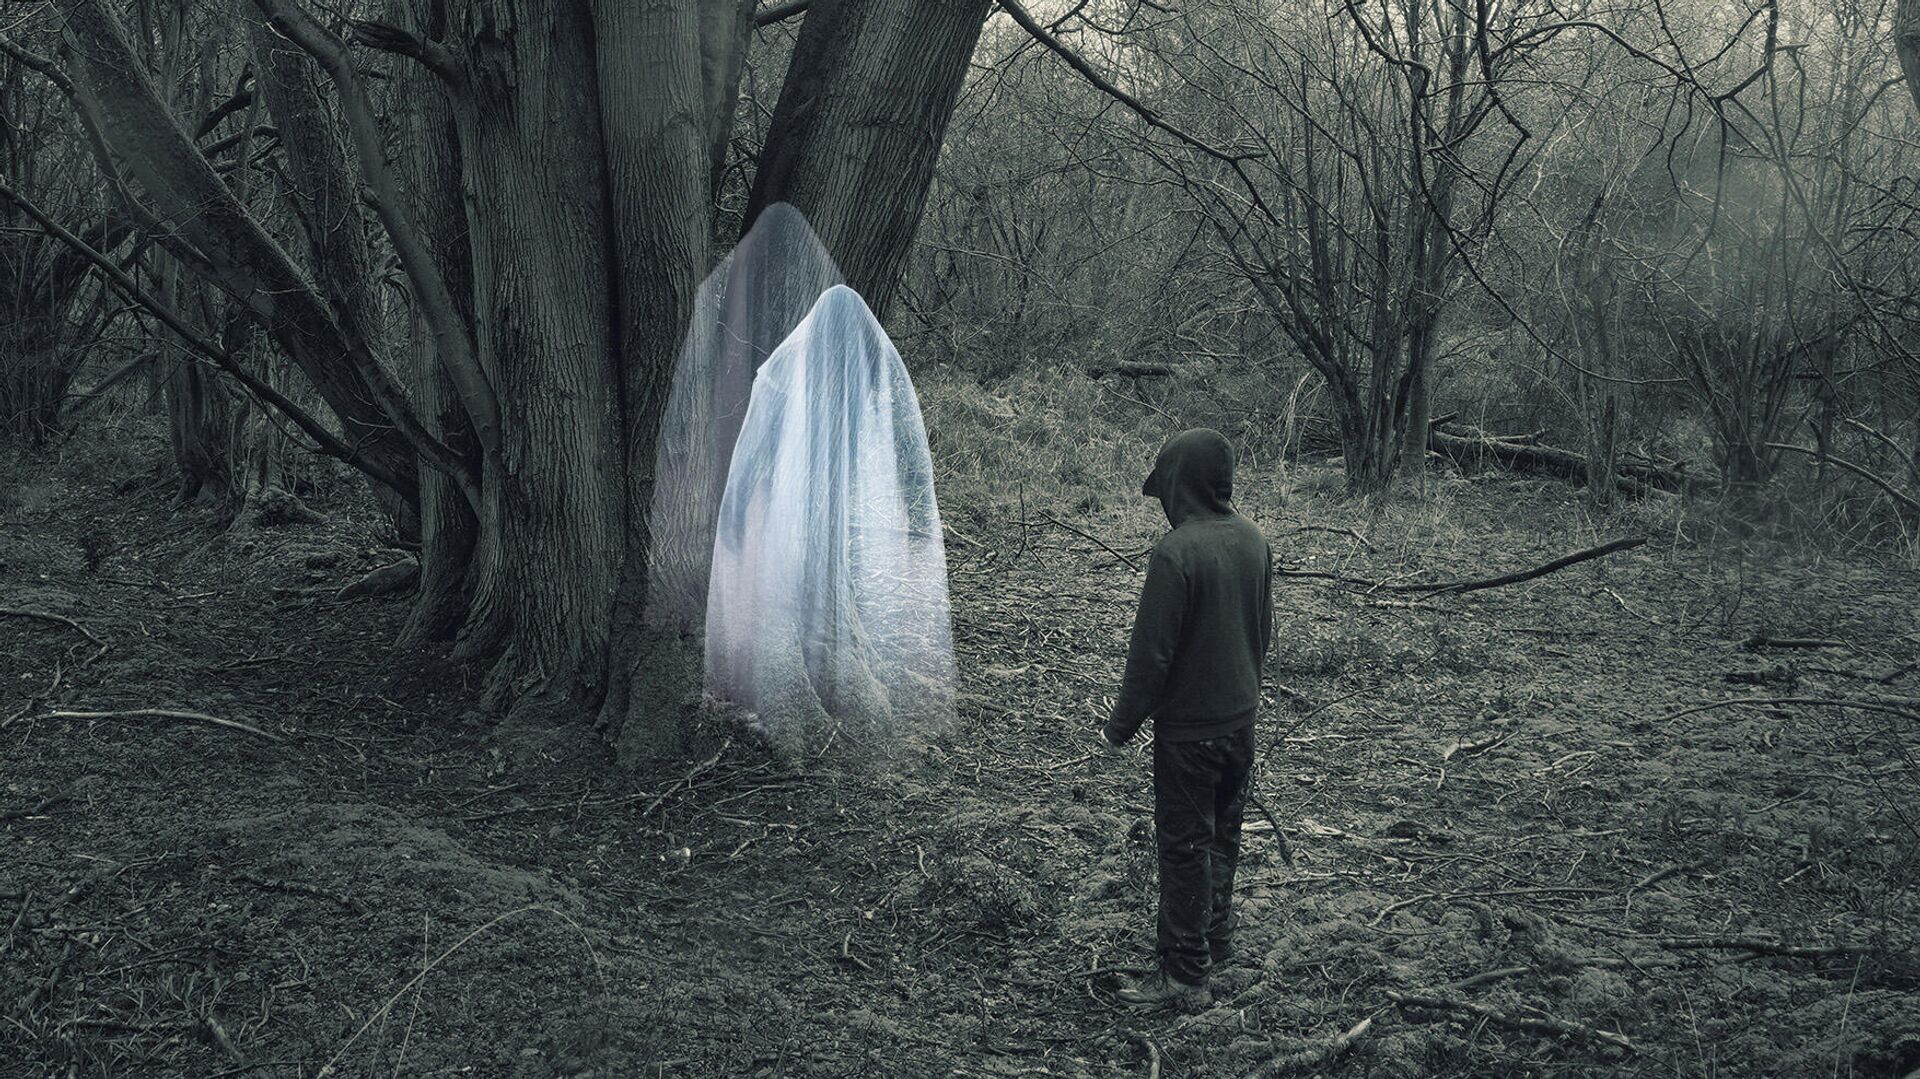 Are ghosts real?